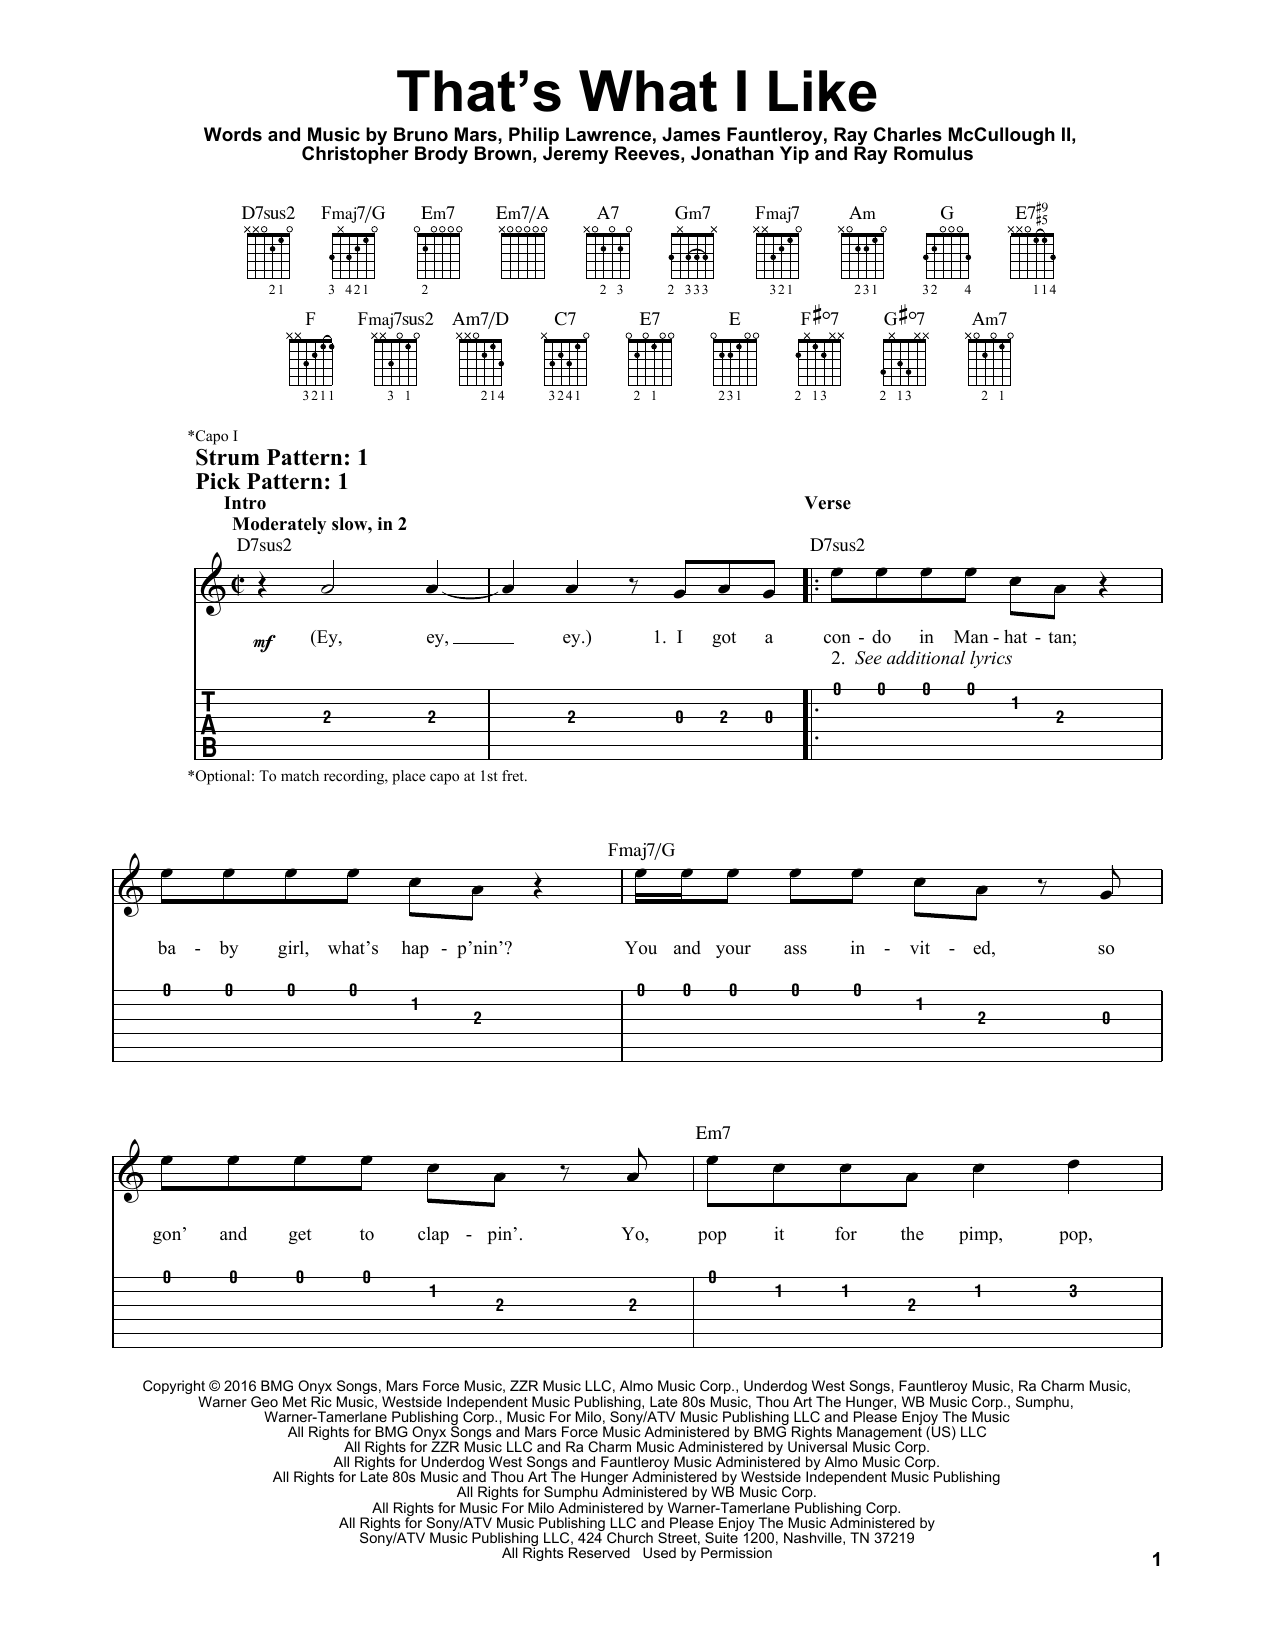 Download Bruno Mars That's What I Like Sheet Music